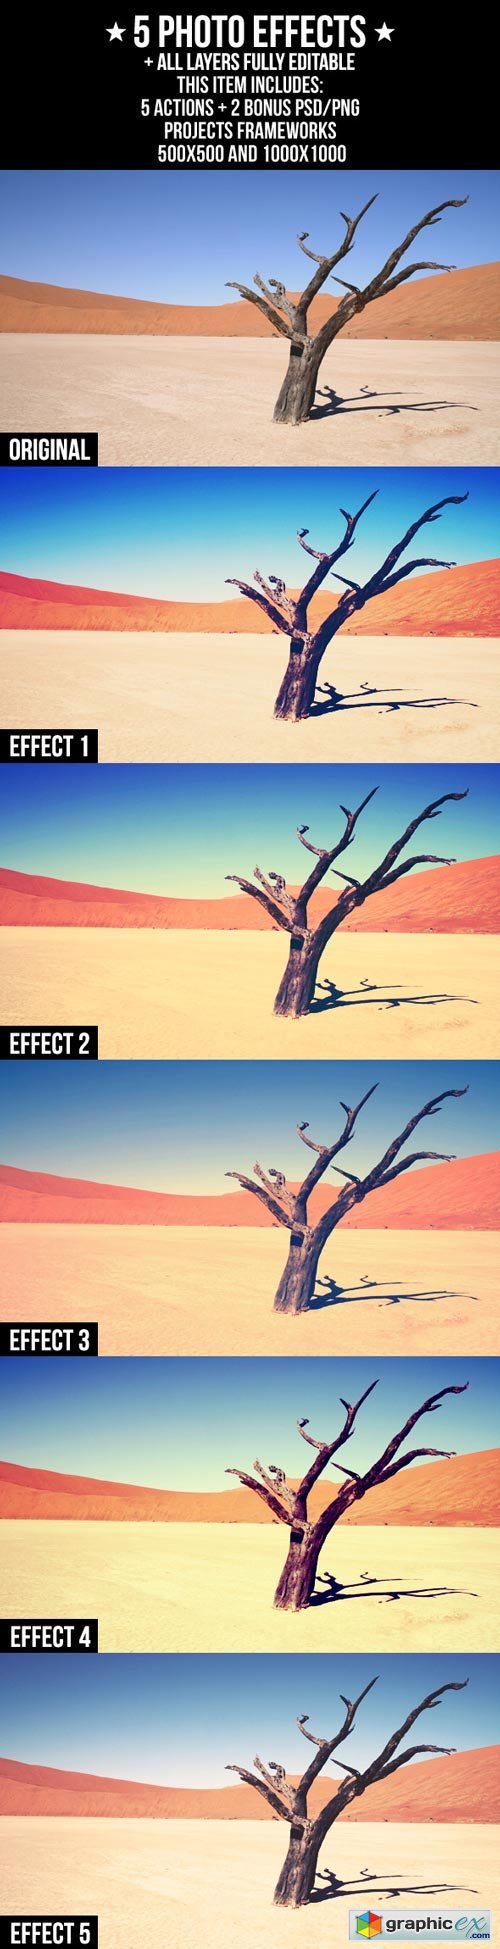 5 Photo Effects